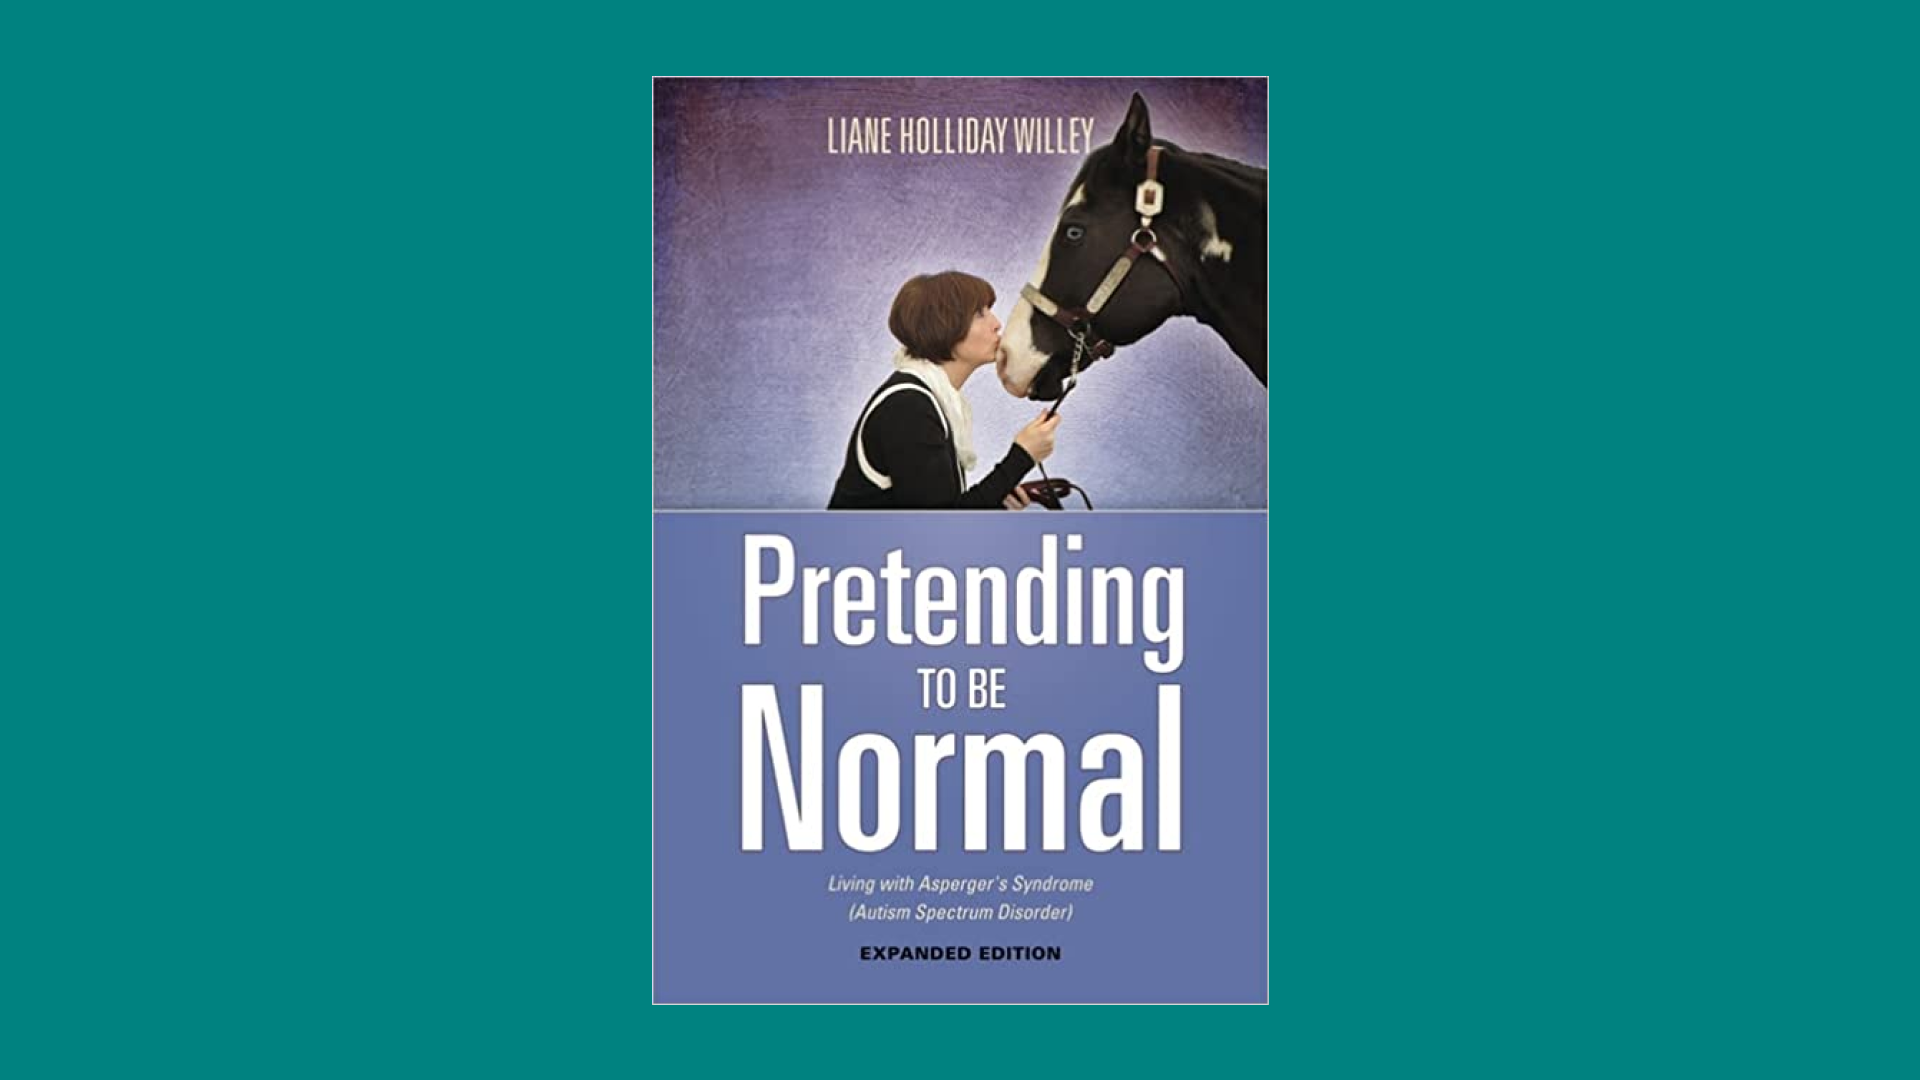 Cover of book "Pretending to Be Normal," which features a woman and a horse